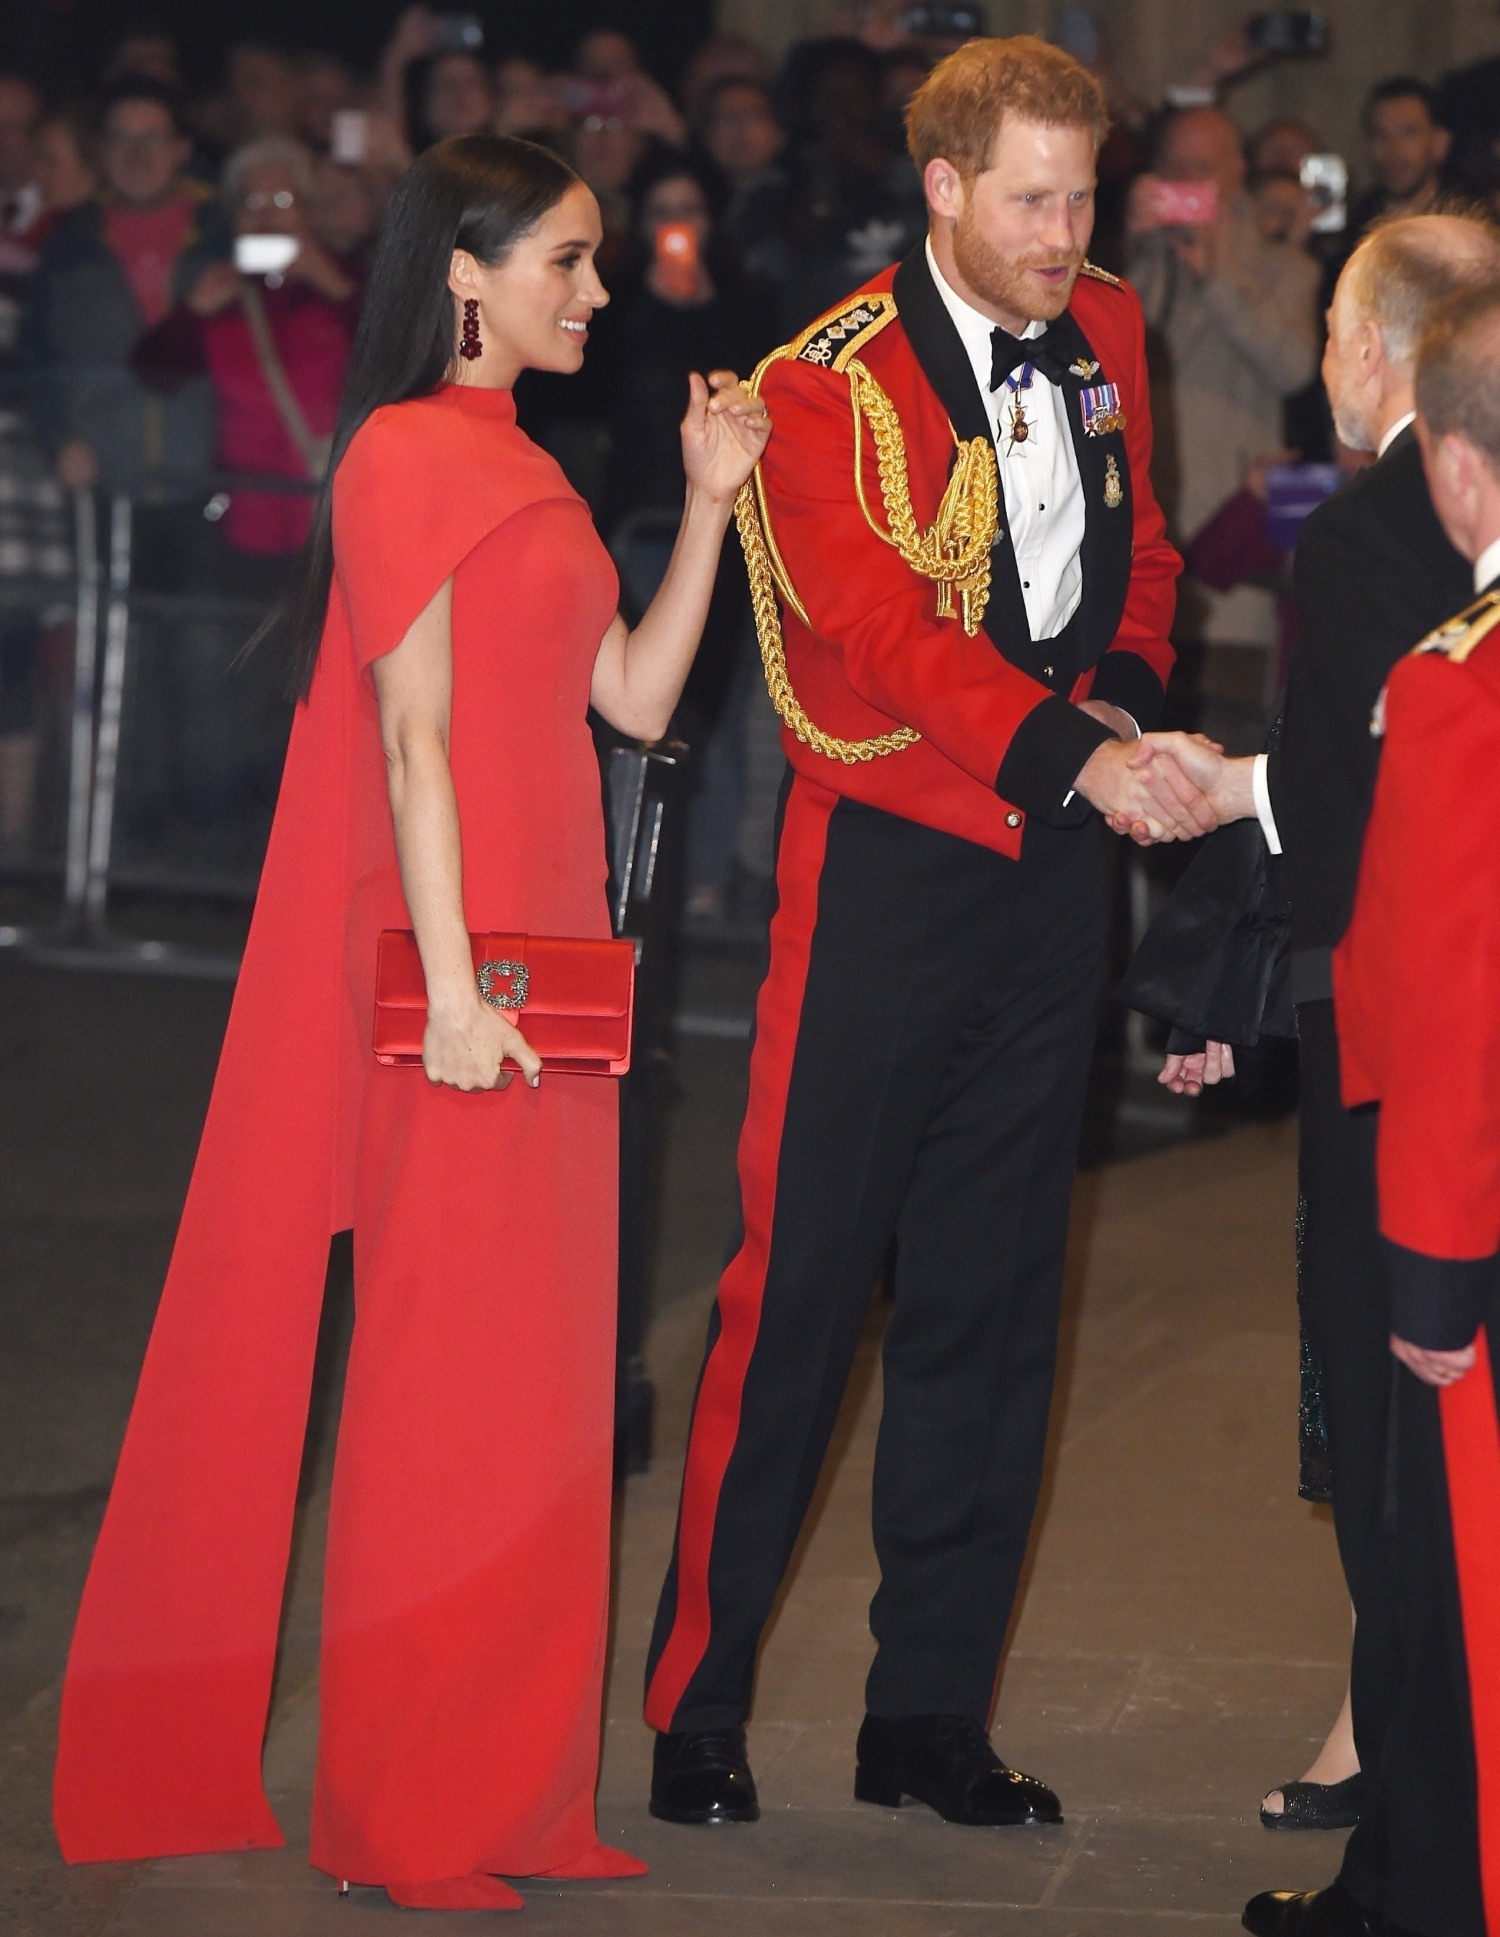 The Duke and Duchess of Sussex are pictured during their arrival at The Mountbatten Festival of Music